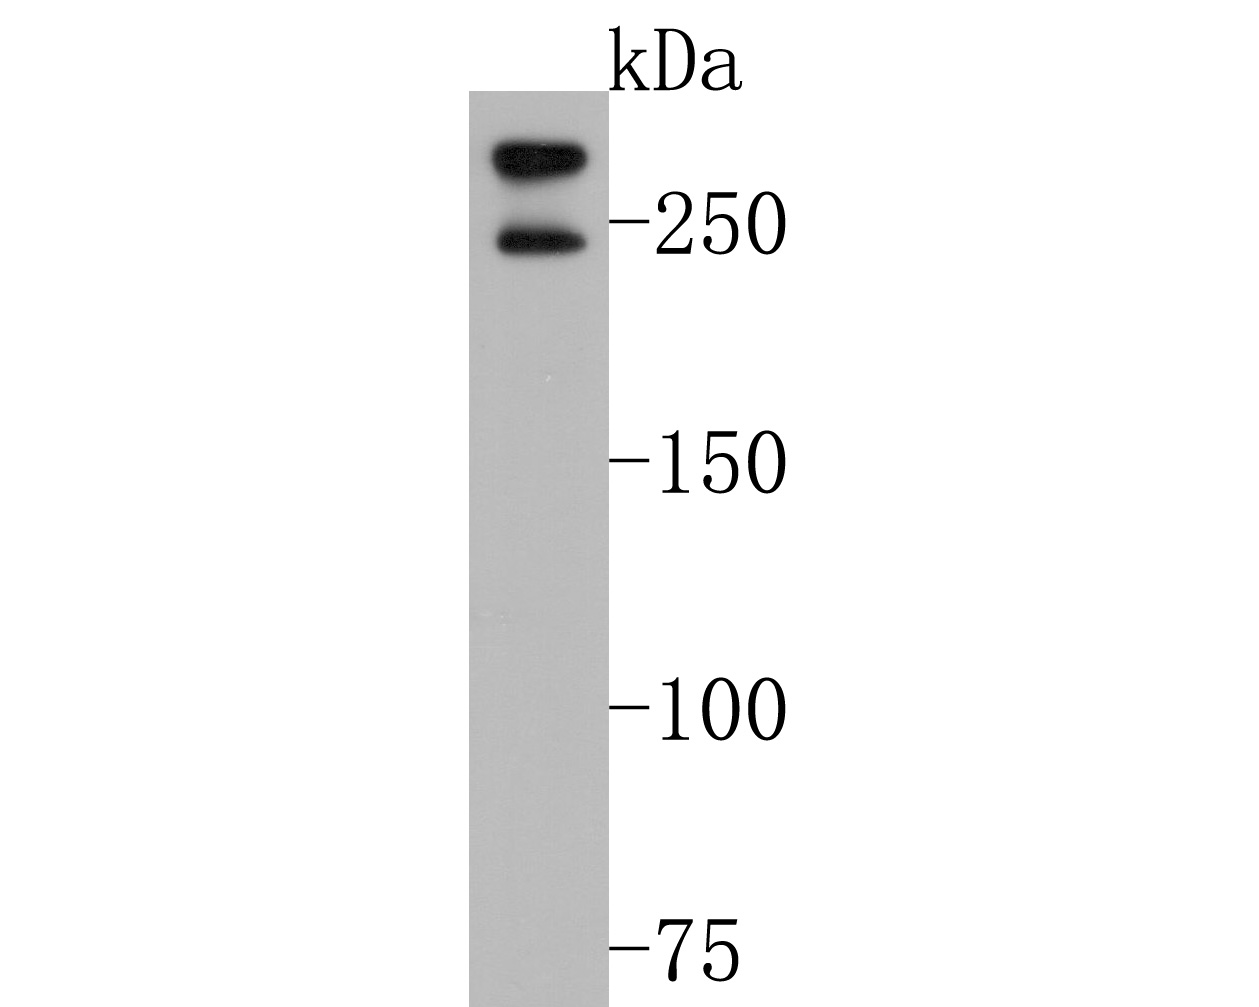 Western blot analysis of POLR2A on MCF-7 cell lysates. Proteins were transferred to a PVDF membrane and blocked with 5% NFDM/TBST for 1 hour at room temperature. The primary antibody (HA600061, 1/500) was used in 5% NFDM/TBST at room temperature for 2 hours. Goat Anti-Mouse IgG - HRP Secondary Antibody (HA1006) at 1:20,000 dilution was used for 1 hour at room temperature.